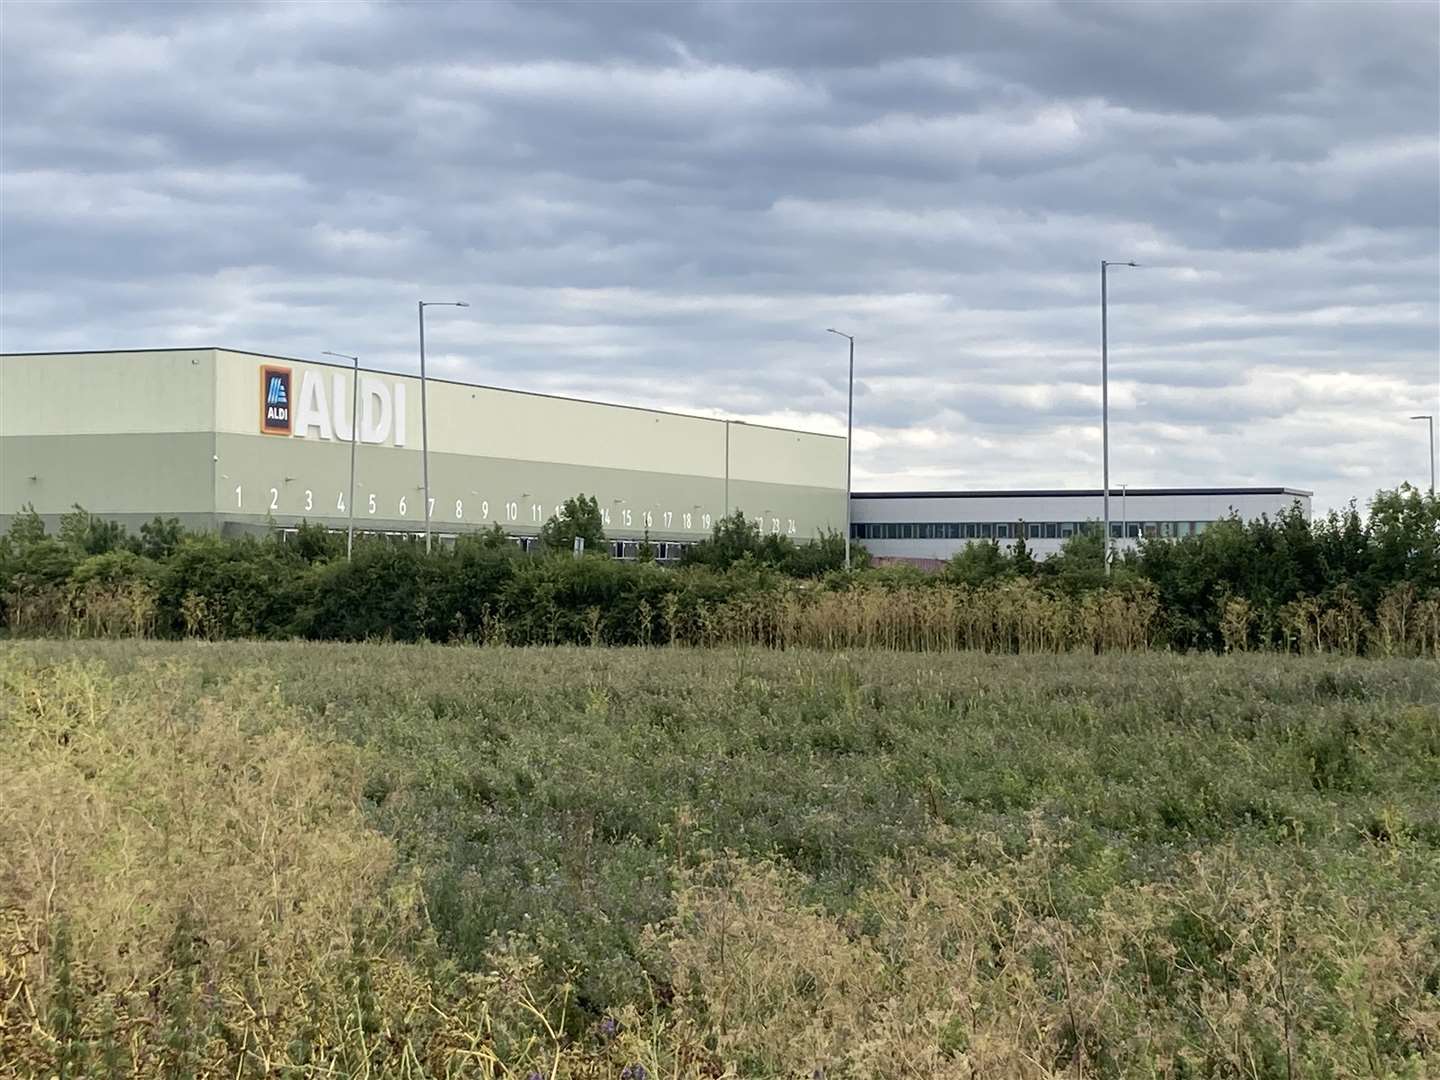 Land at Neats Court, Queenborough, where the new Aldi supermarket is planned